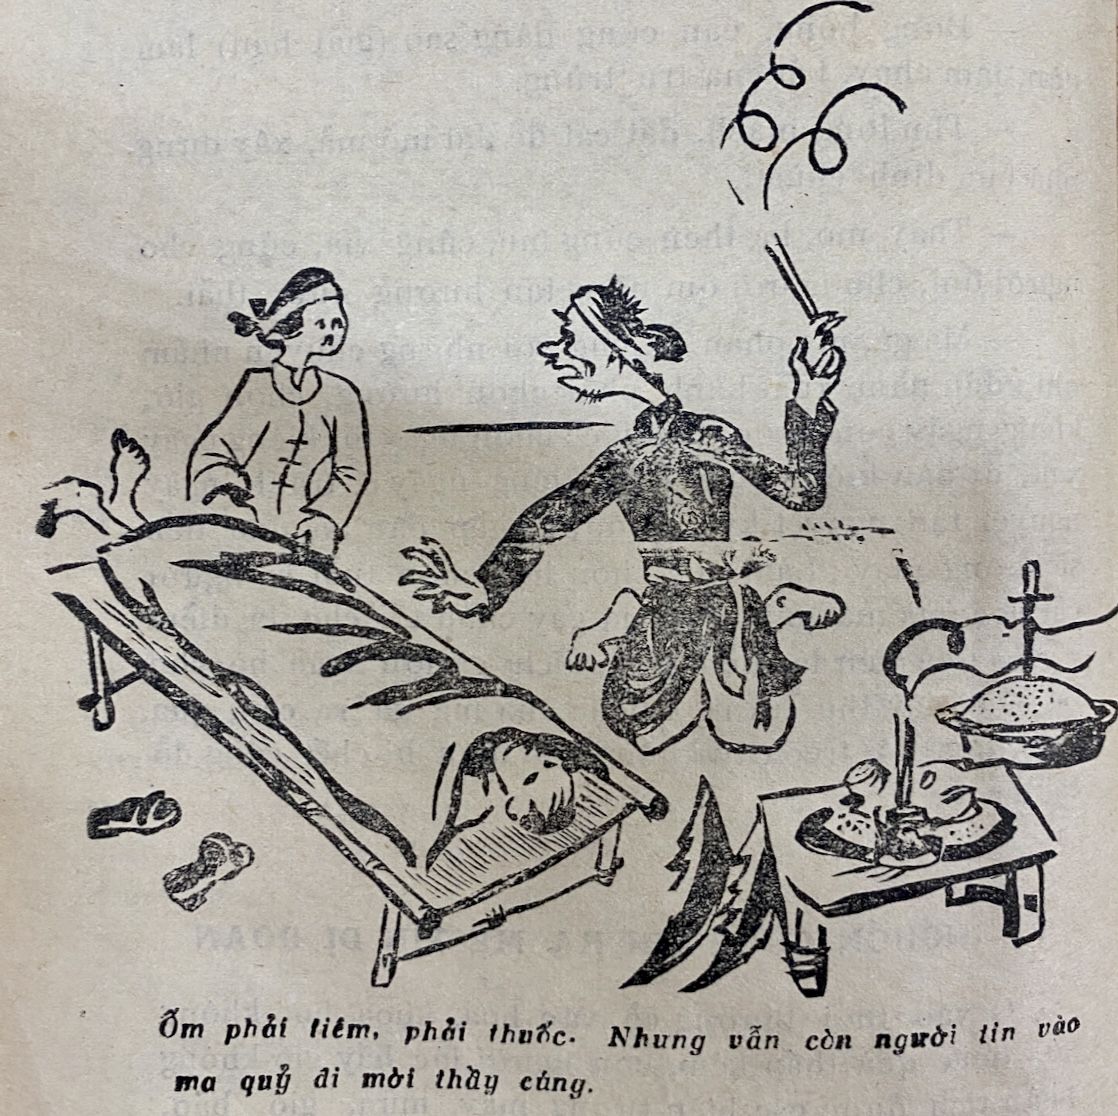 A satirical drawing in an Anti-Superstition booklet, 1963. The caption advises people to seek medical help when sick, instead of relying on a shaman. Courtesy of the National Library, Hanoi.